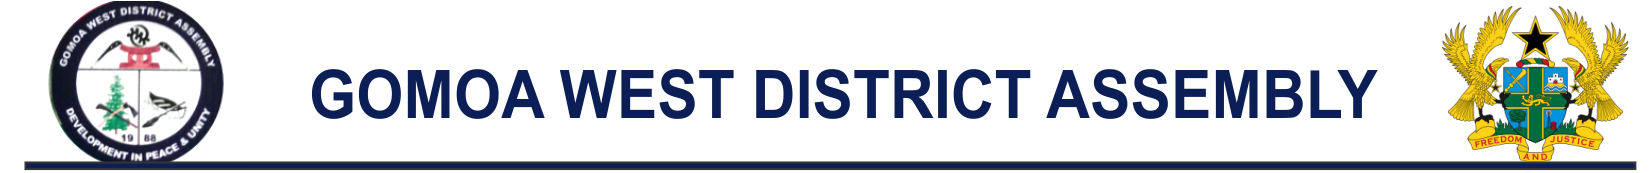 Gomoa West District Assembly Logo